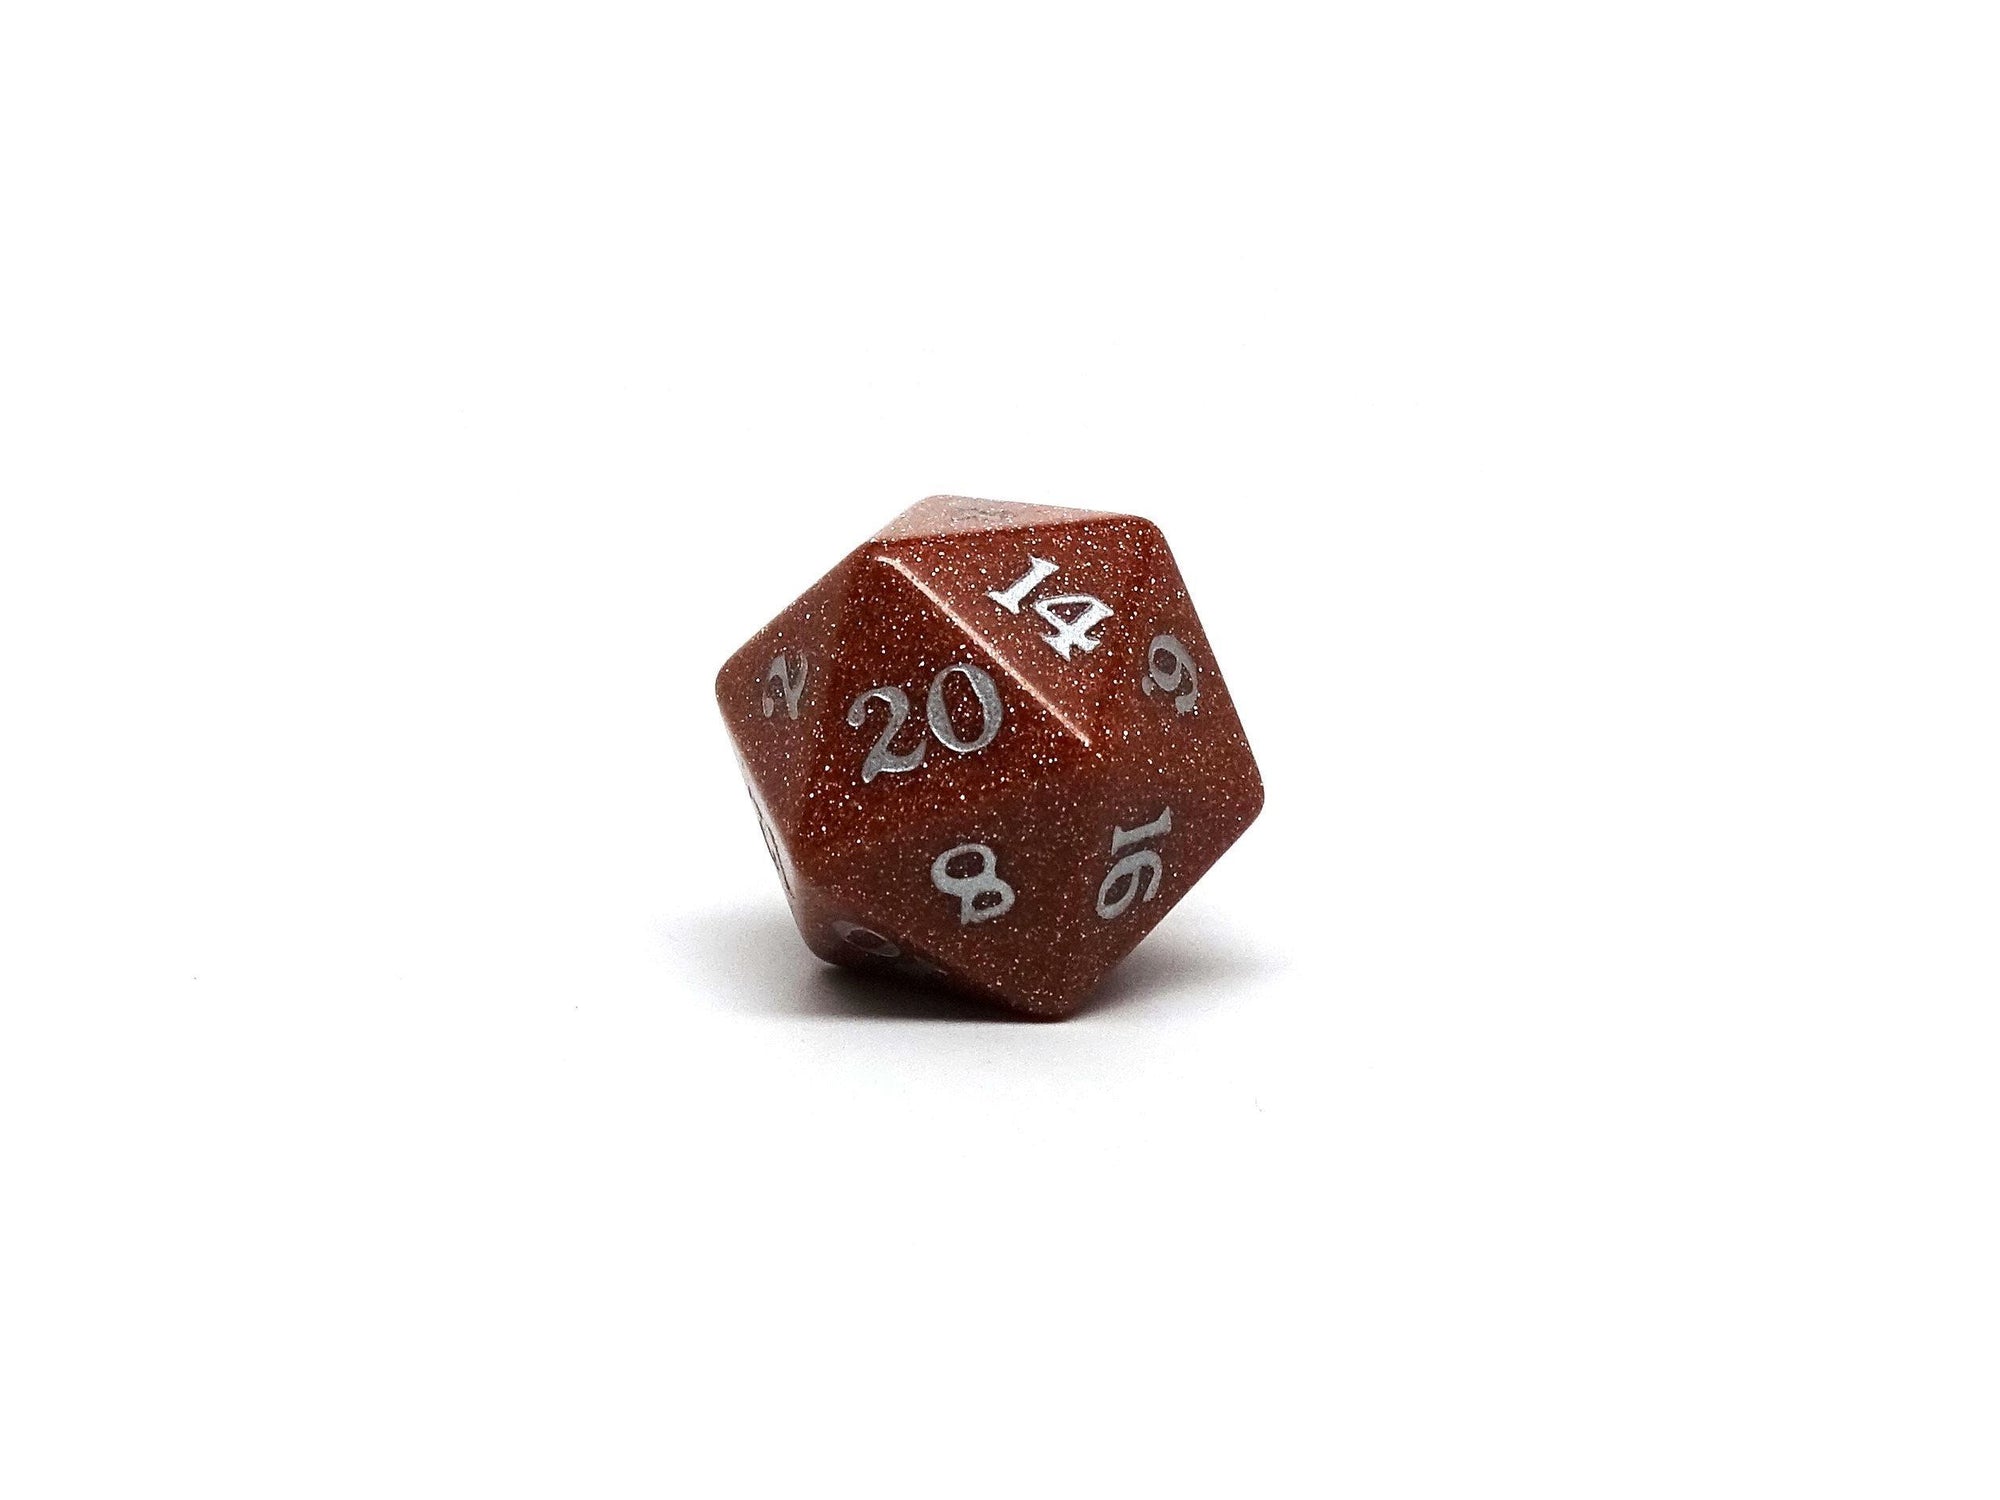 Legendary Gold D20 Dice - Metal Single 20 Sided Dice - Easy Roller Dice  Company